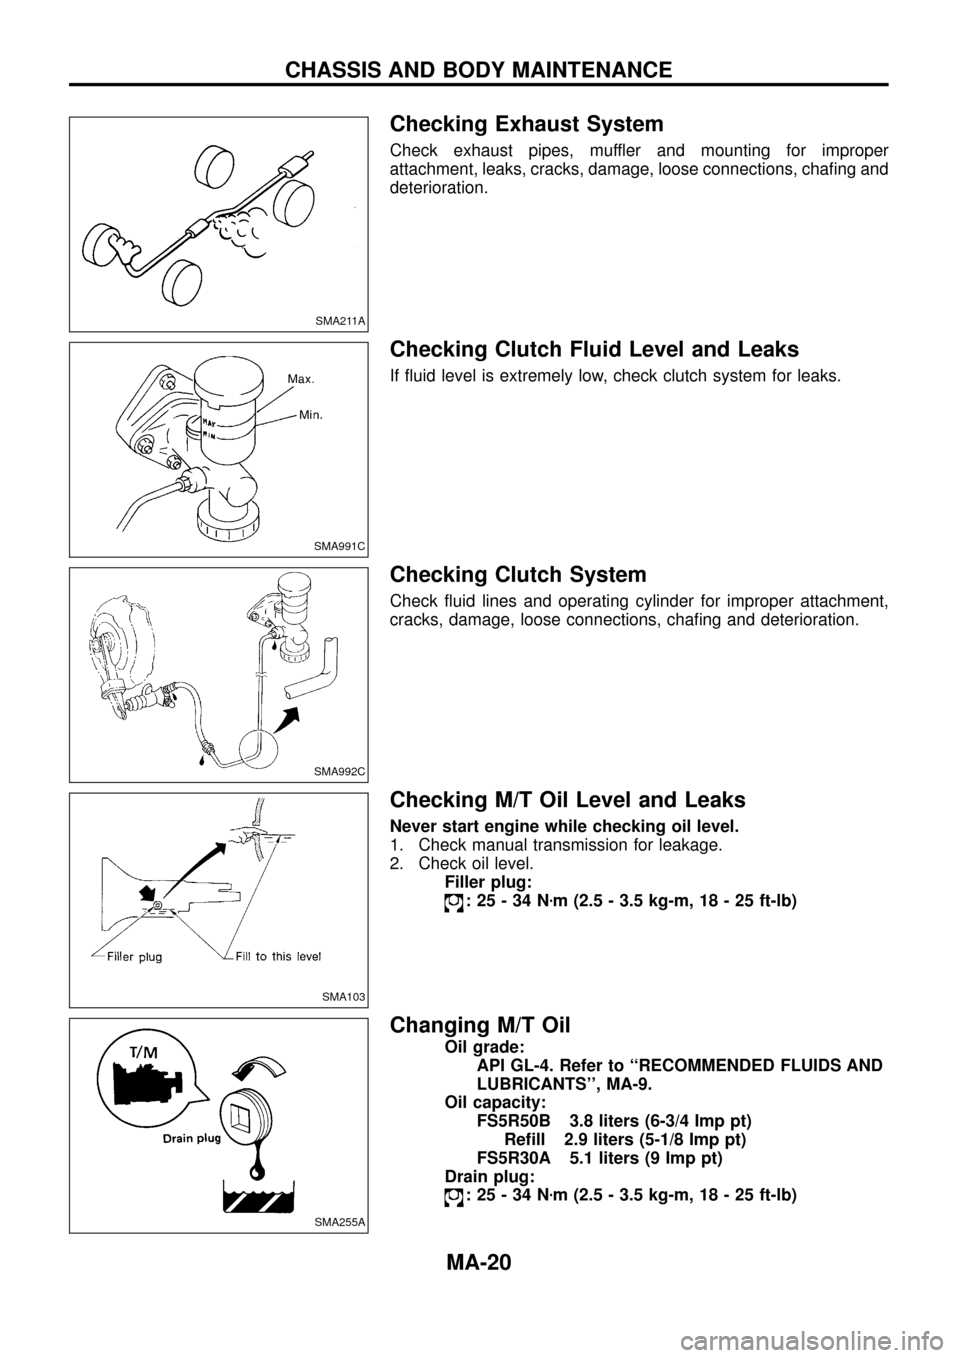 NISSAN PATROL 1998 Y61 / 5.G Maintenance Owners Manual Checking Exhaust System
Check exhaust pipes, muffler and mounting for improper
attachment, leaks, cracks, damage, loose connections, cha®ng and
deterioration.
Checking Clutch Fluid Level and Leaks
If